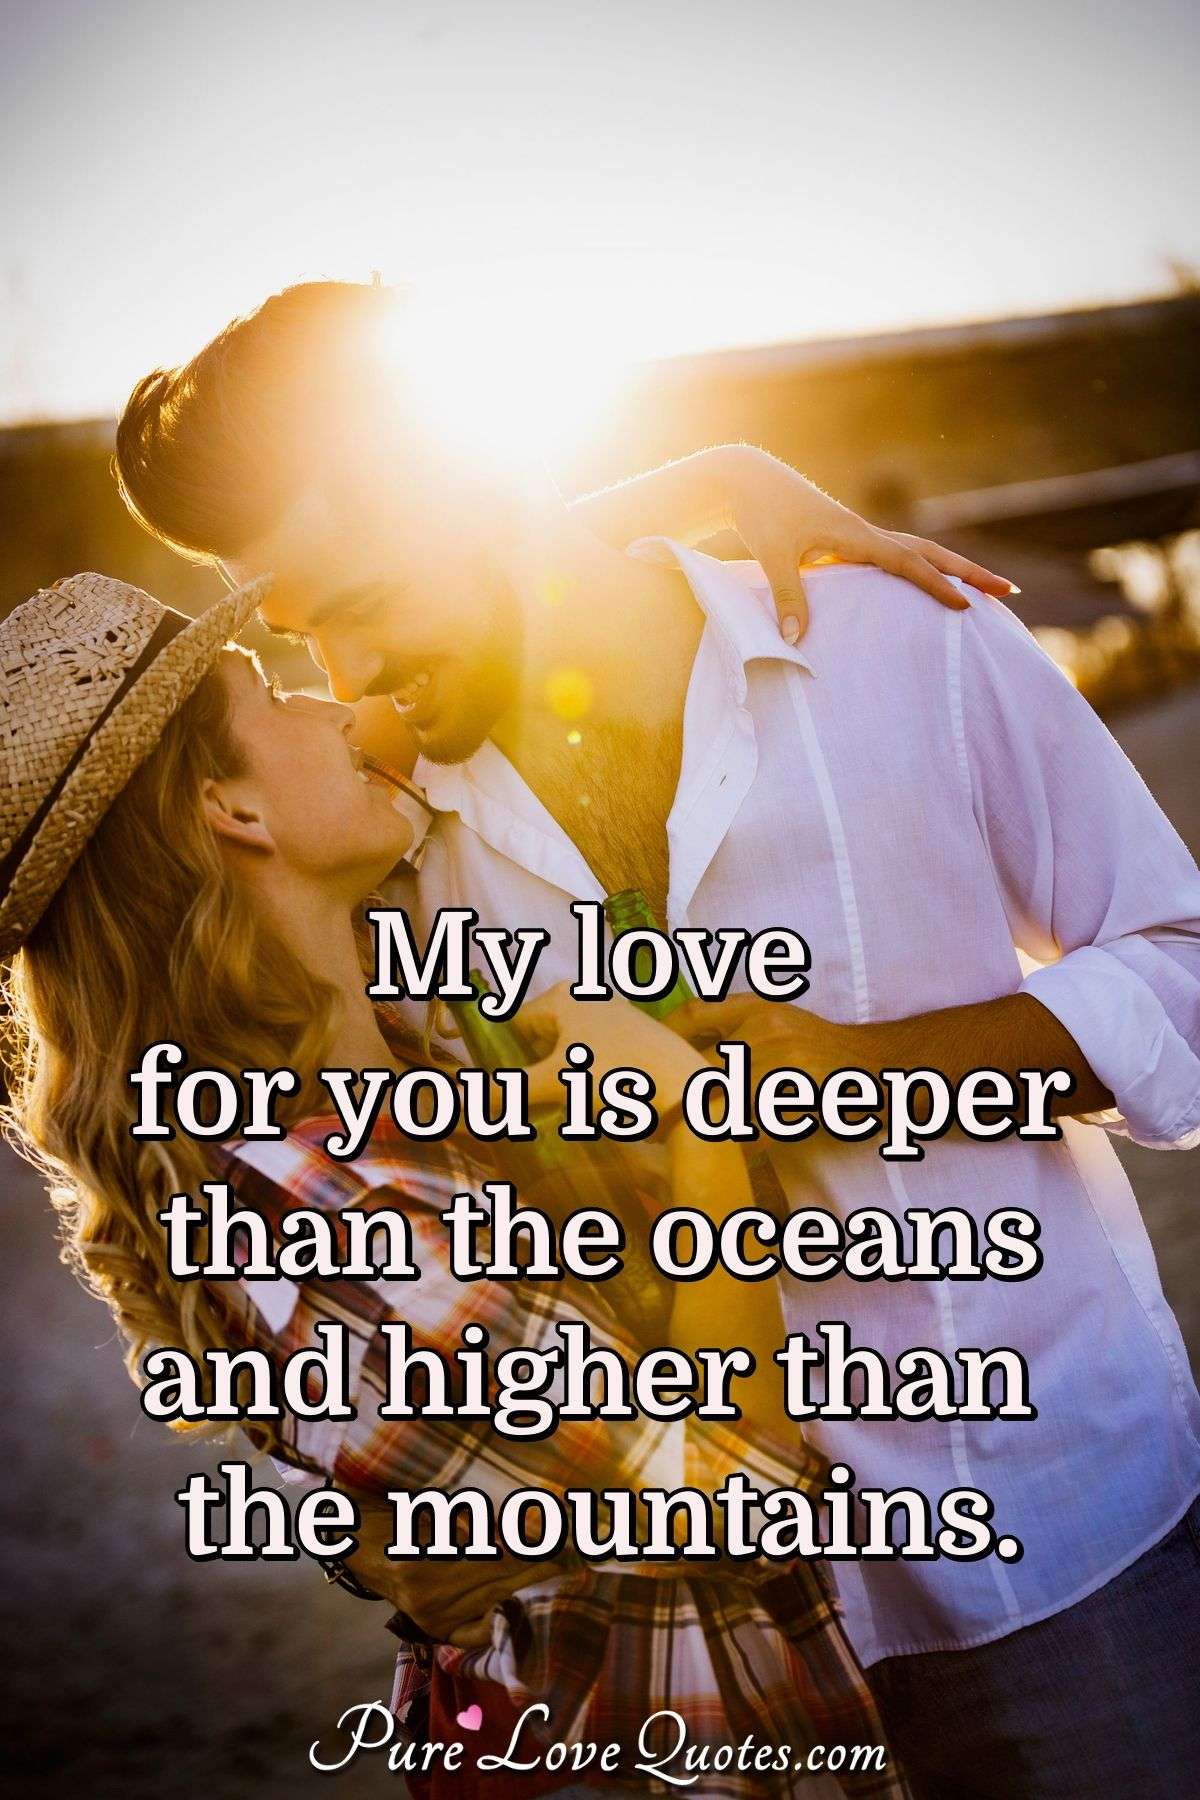 My love for you is deeper than the oceans and higher than the mountains. - Anonymous